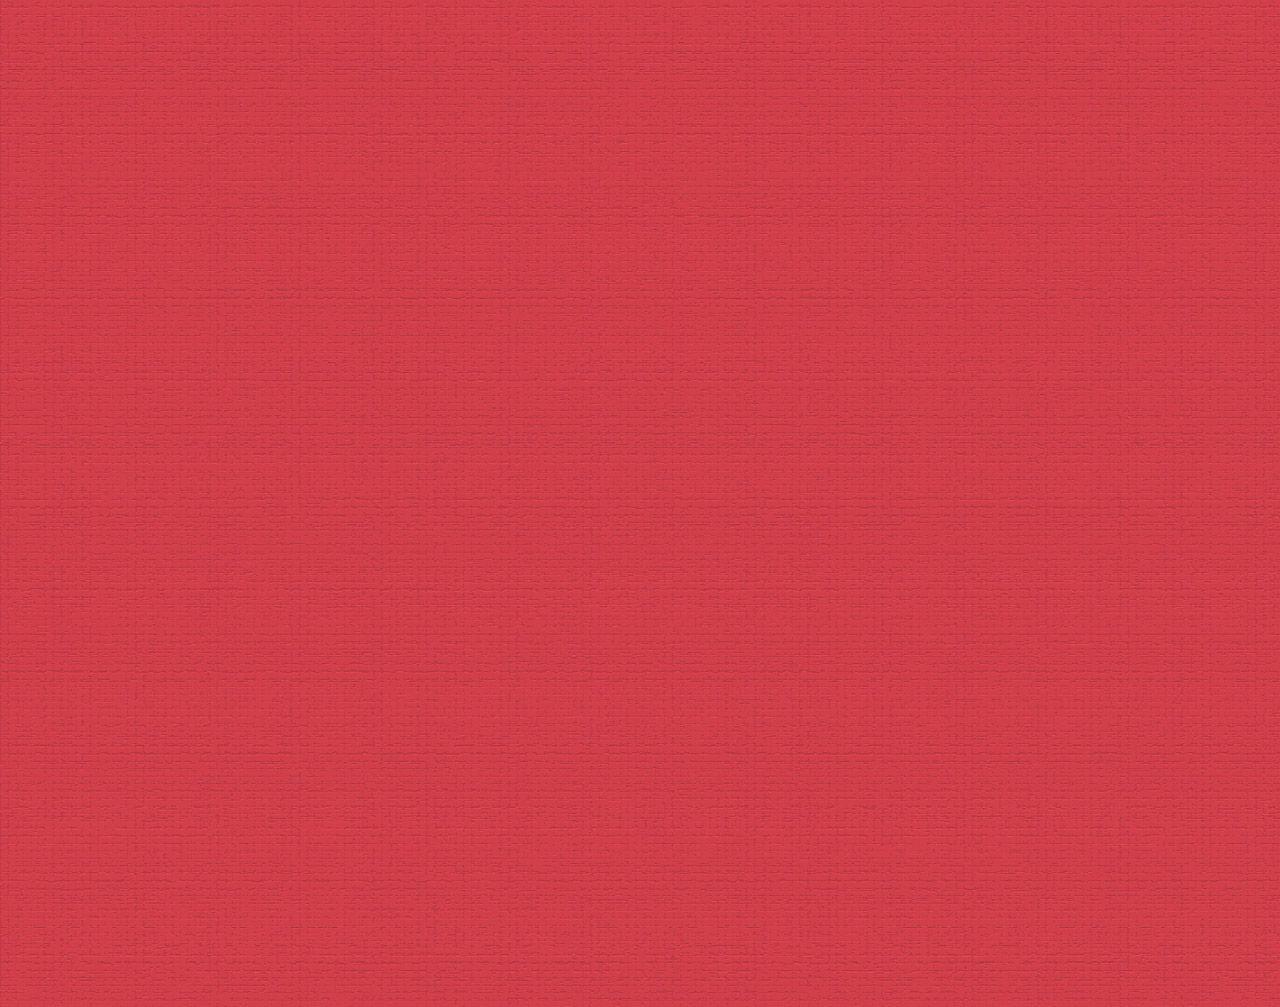 plain red backgrounds for photoshop